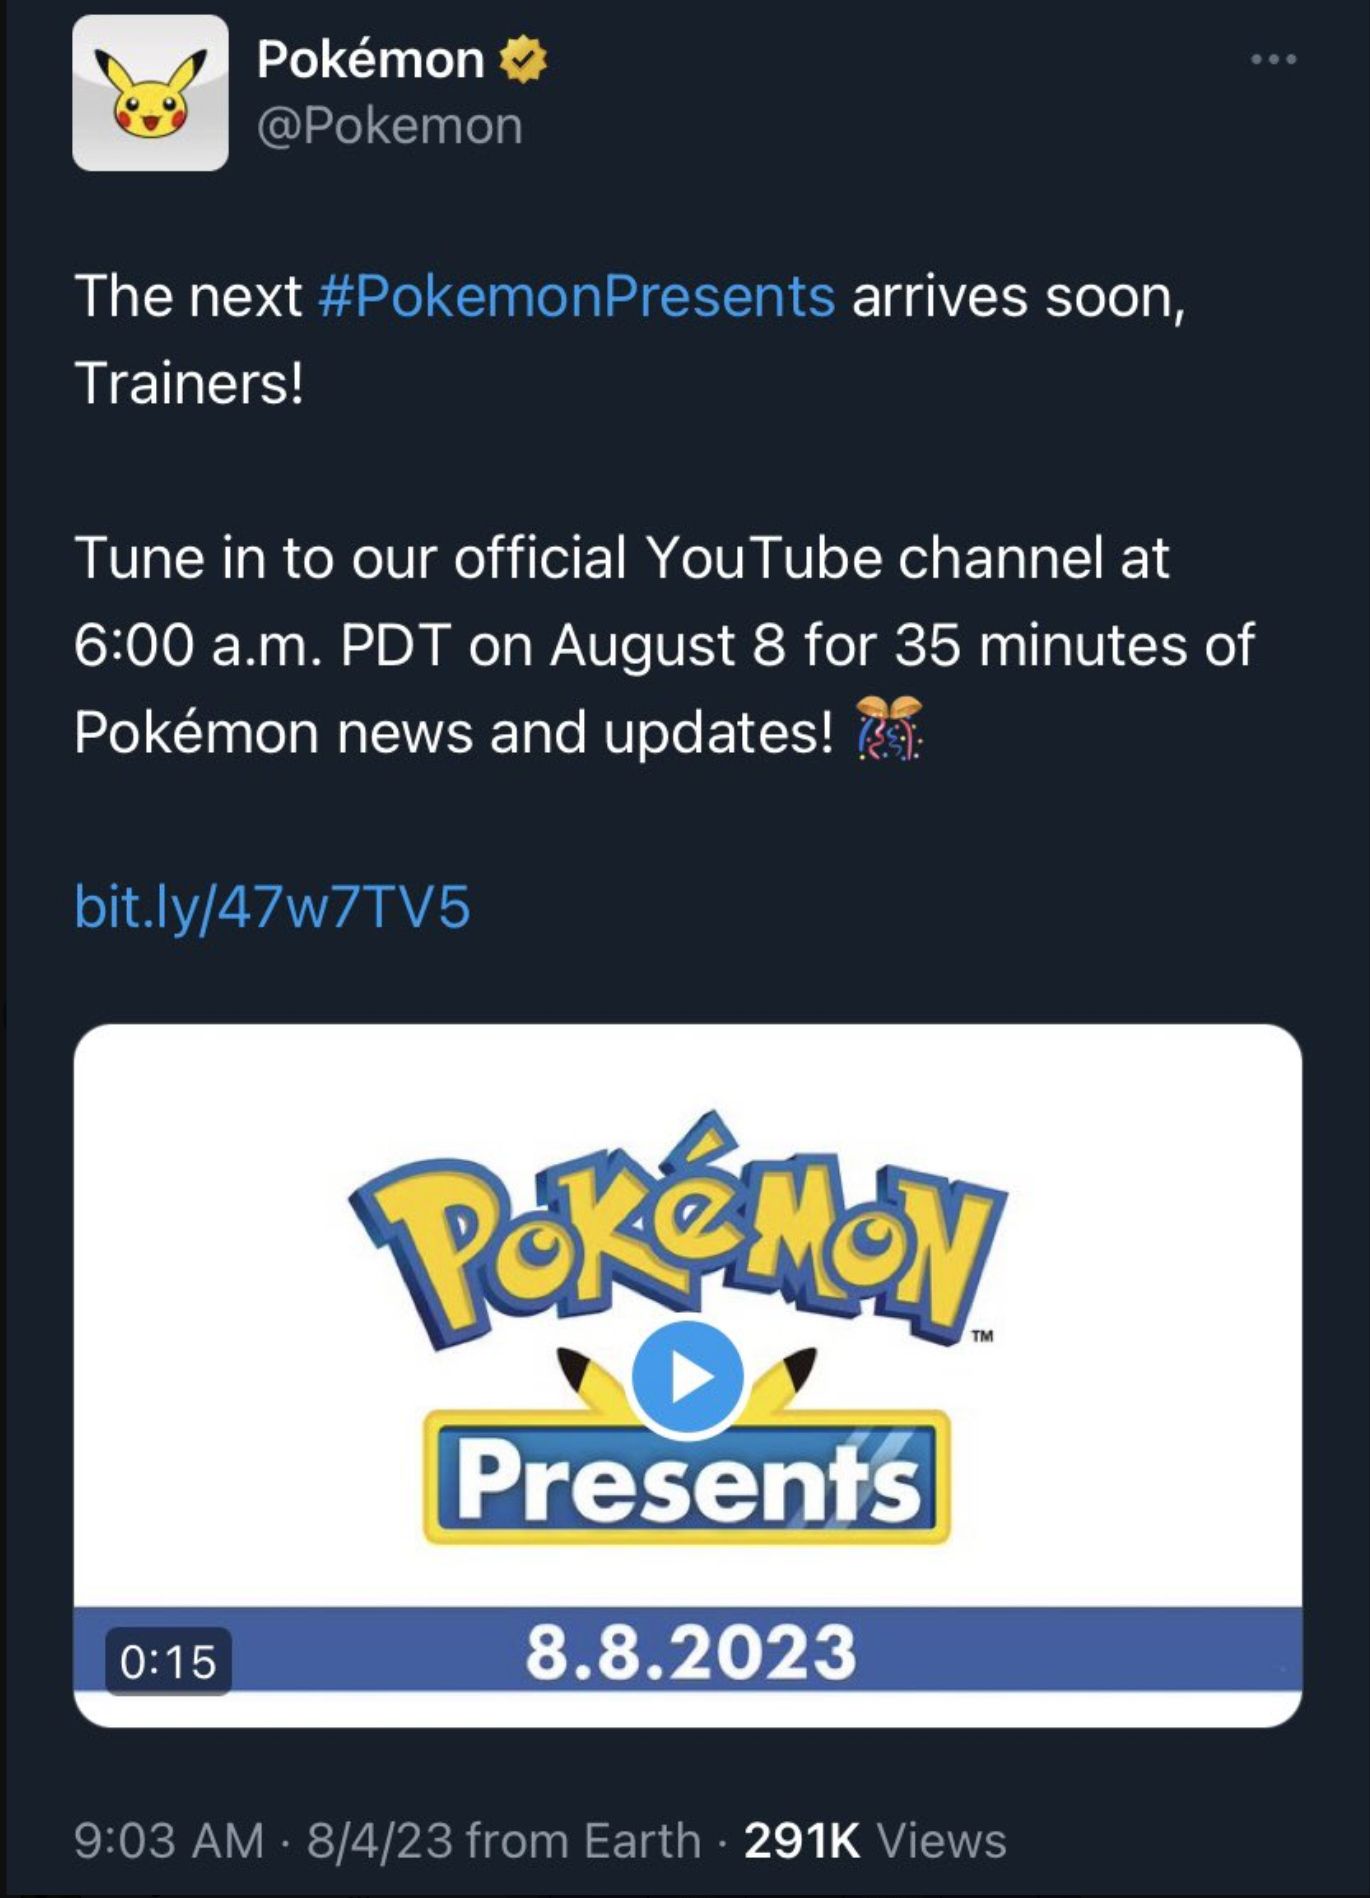 Pokemon Scarlet and Violet, Summary Of Pokemon Presents August 8, 2023